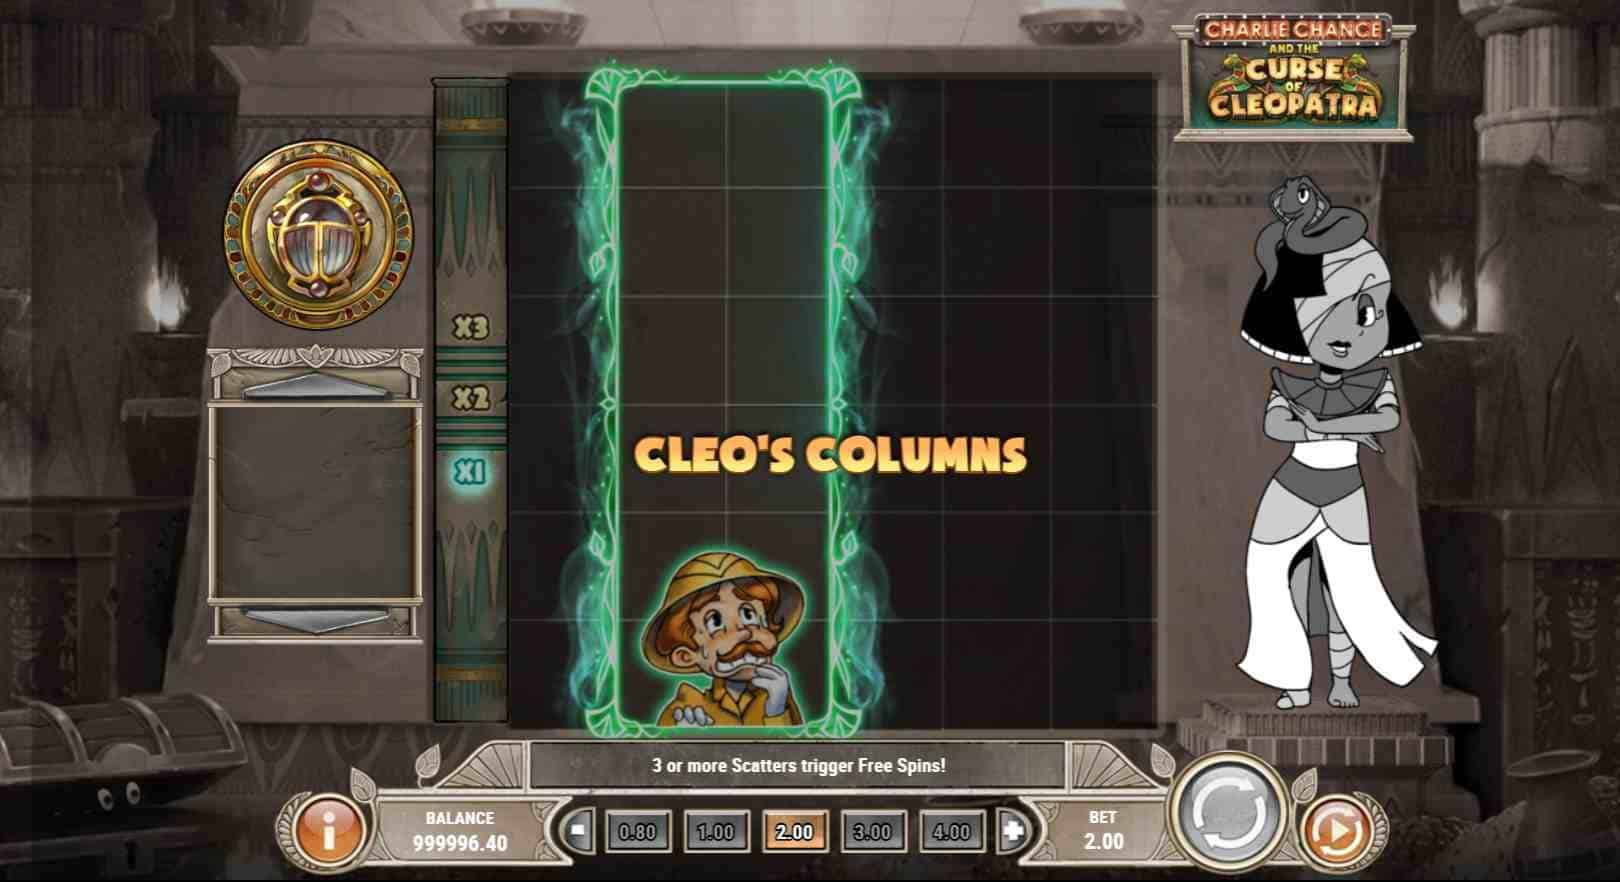 Charlie Chance and the Curse of Cleopatra Base Game